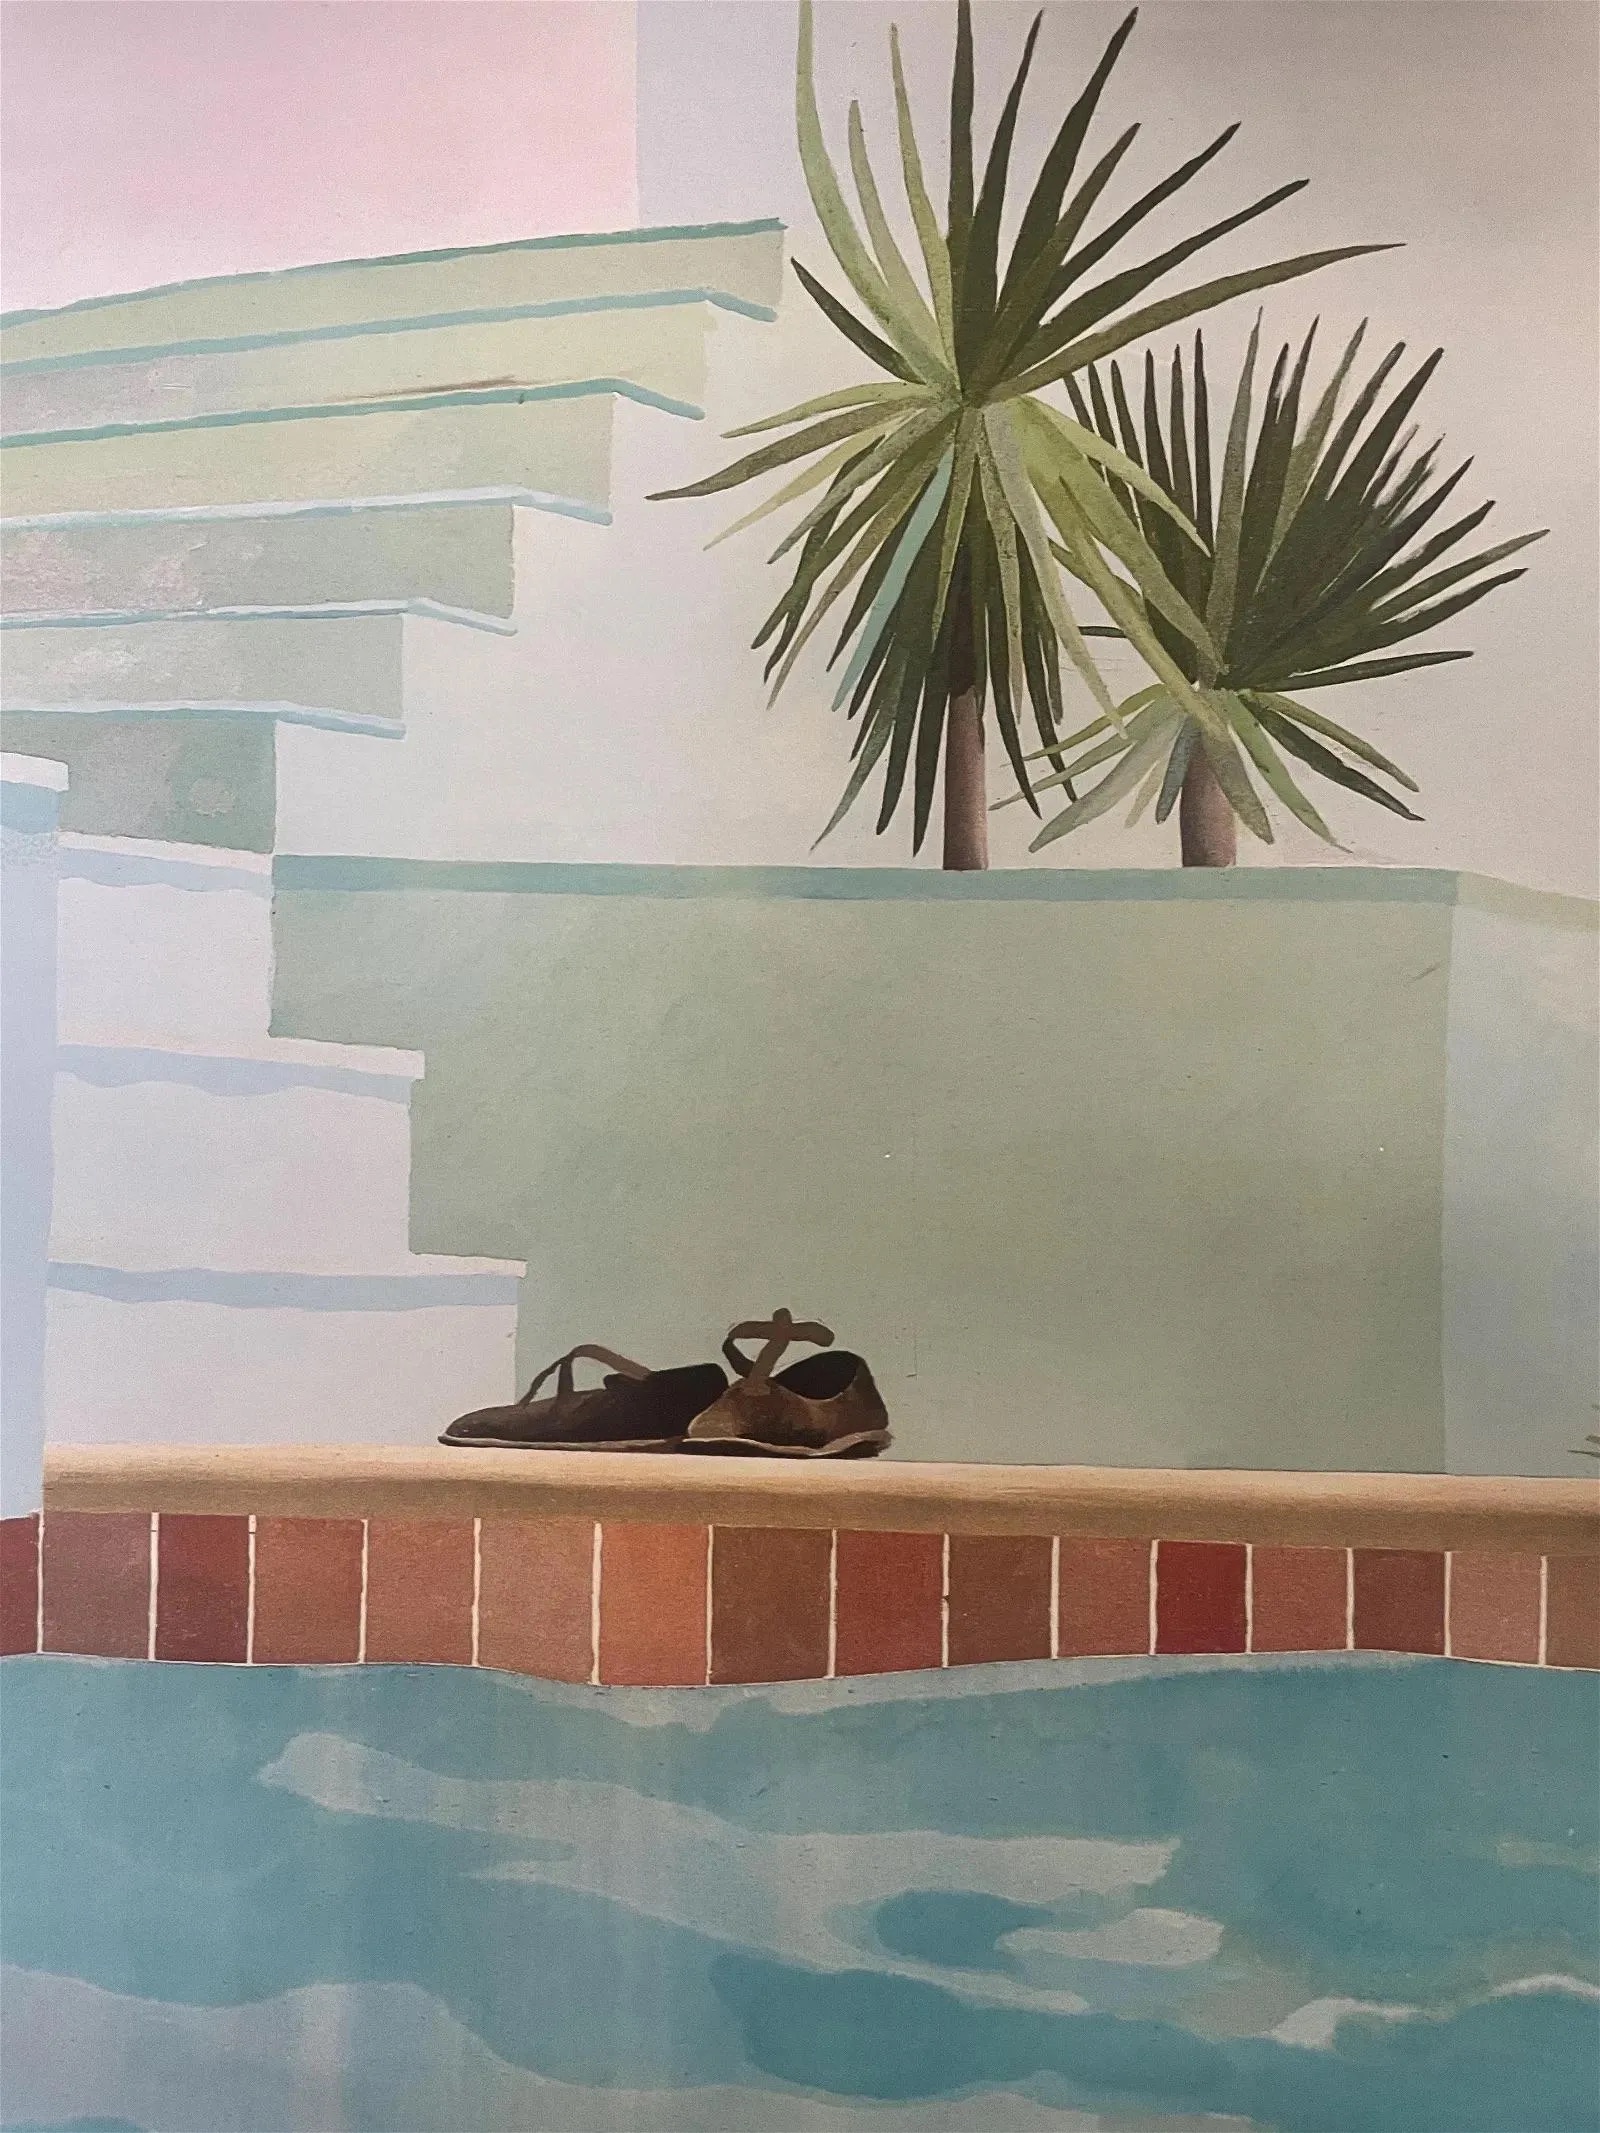 David Hockney "Pool and Steps, 1971" Offset Lithograph - Image 3 of 6